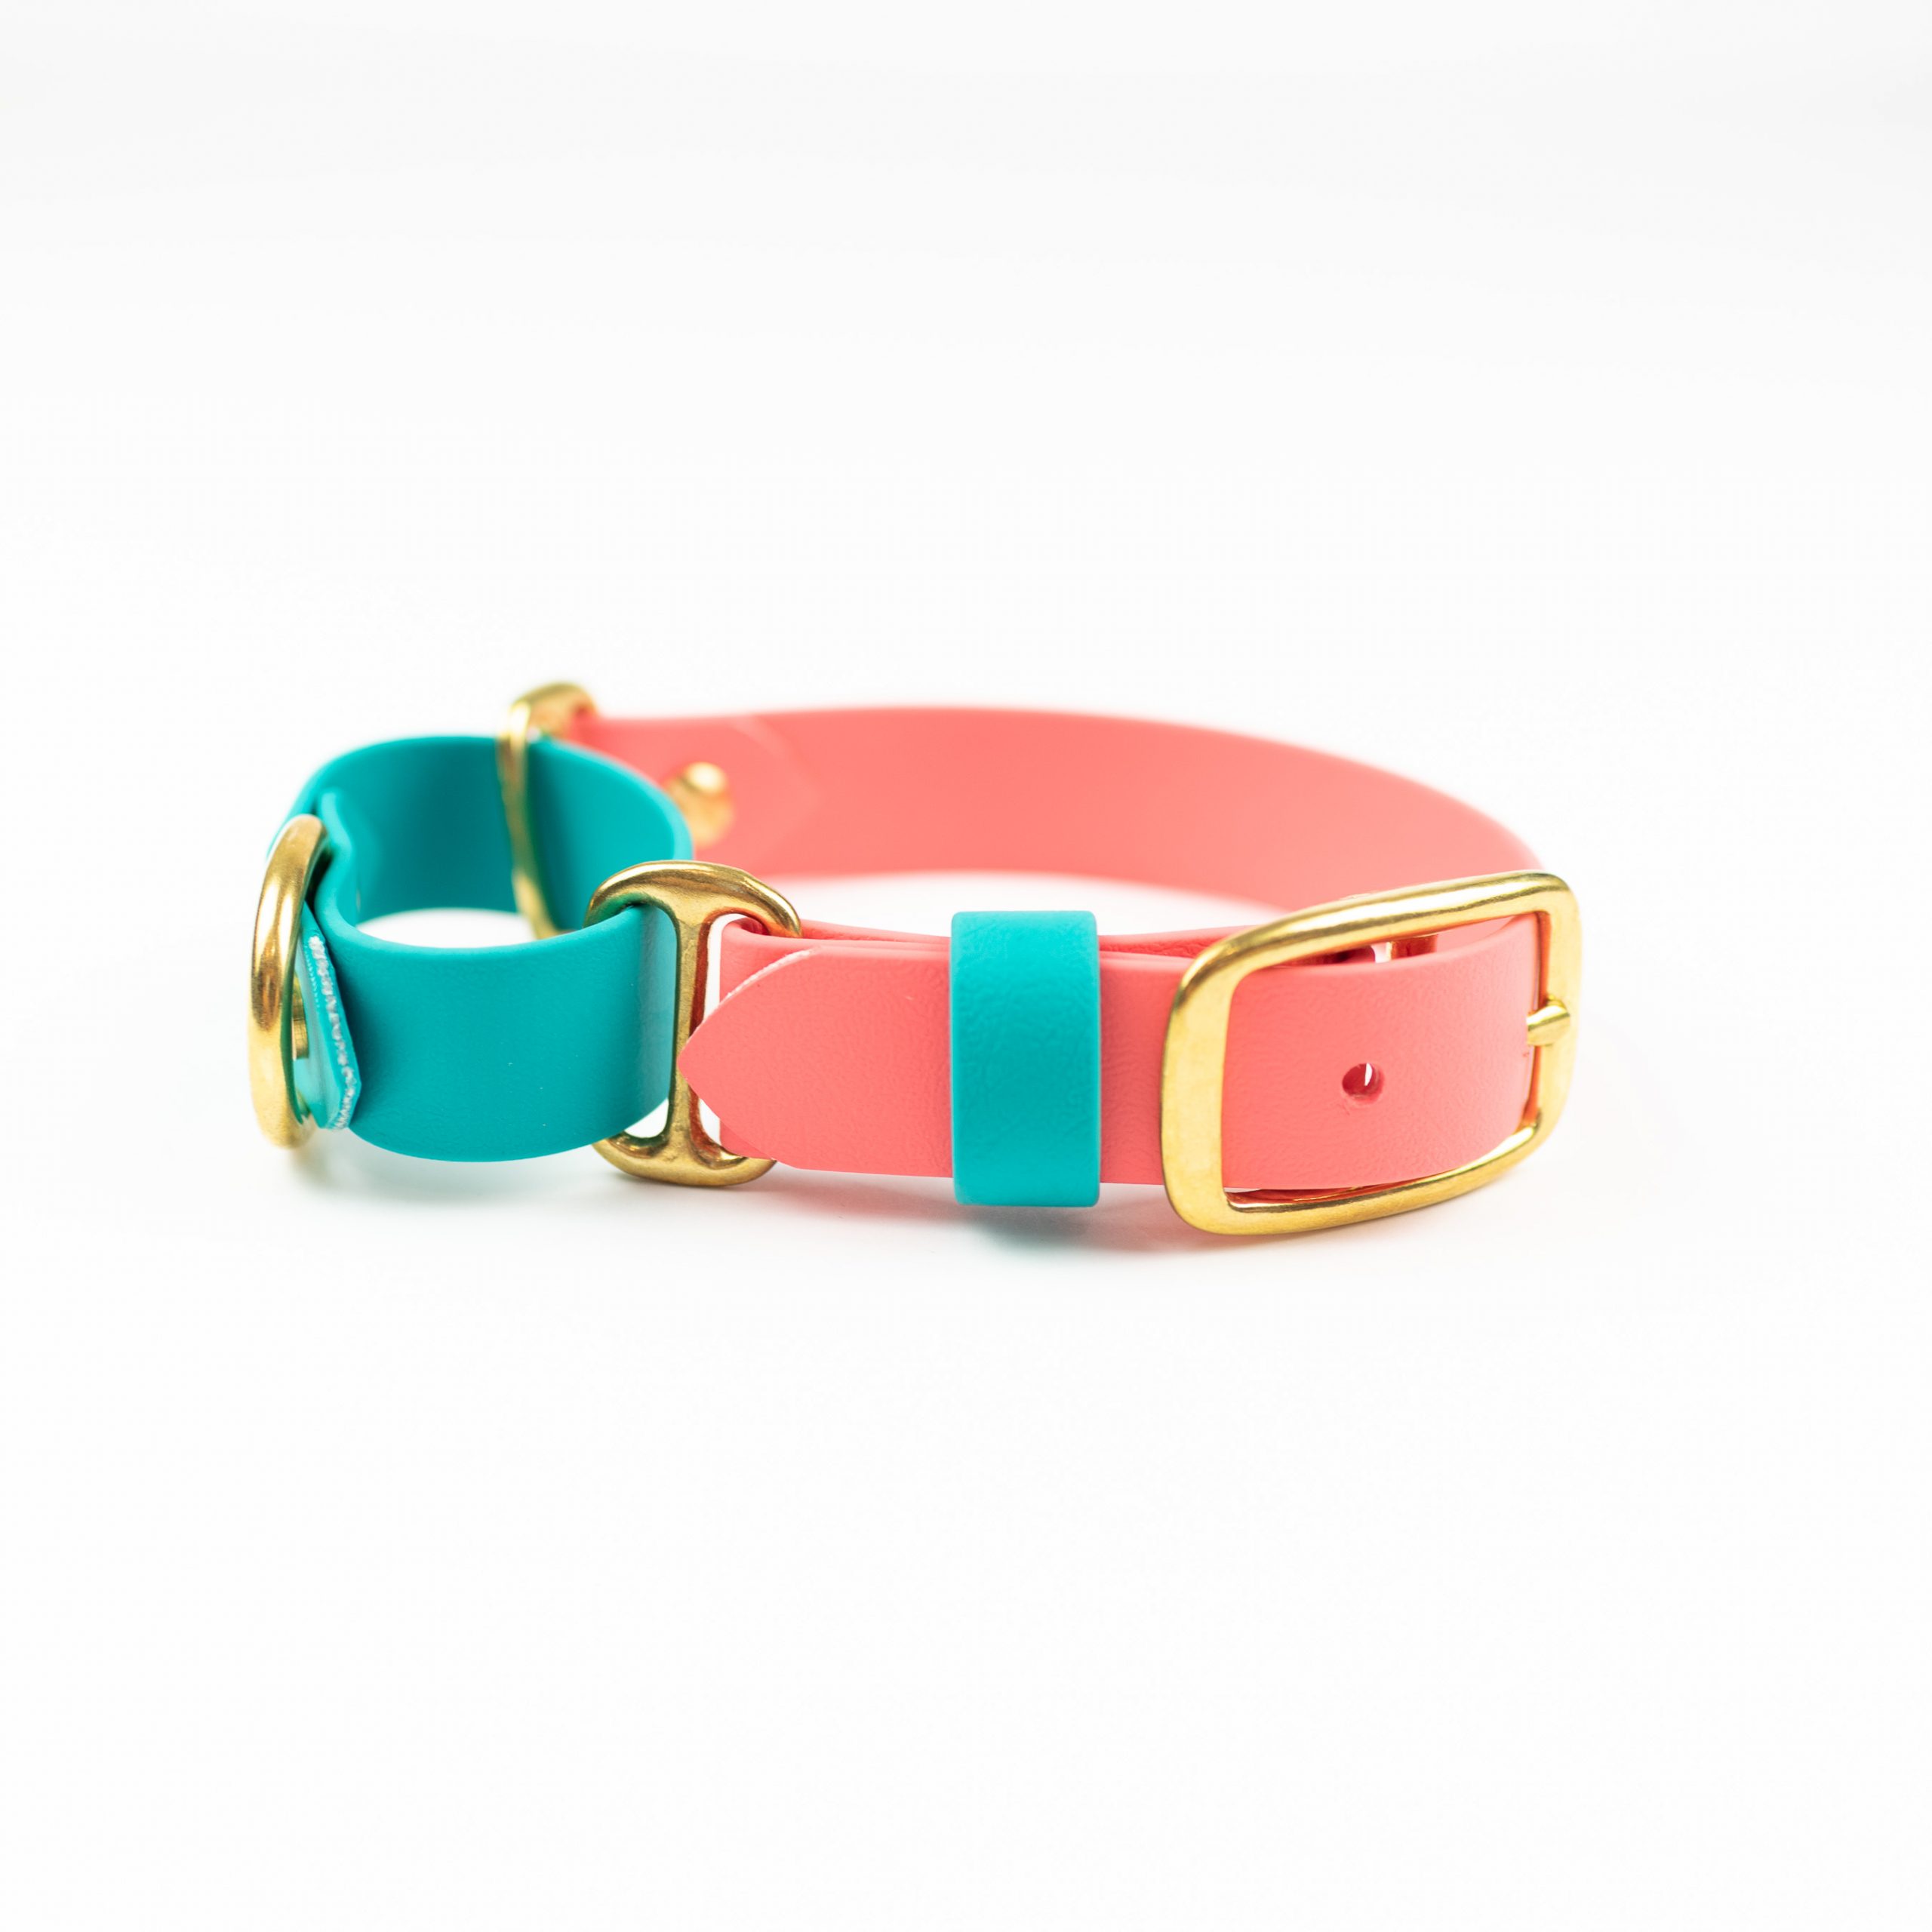 Coral, teal and brass solid brass Adventure Martingale collar